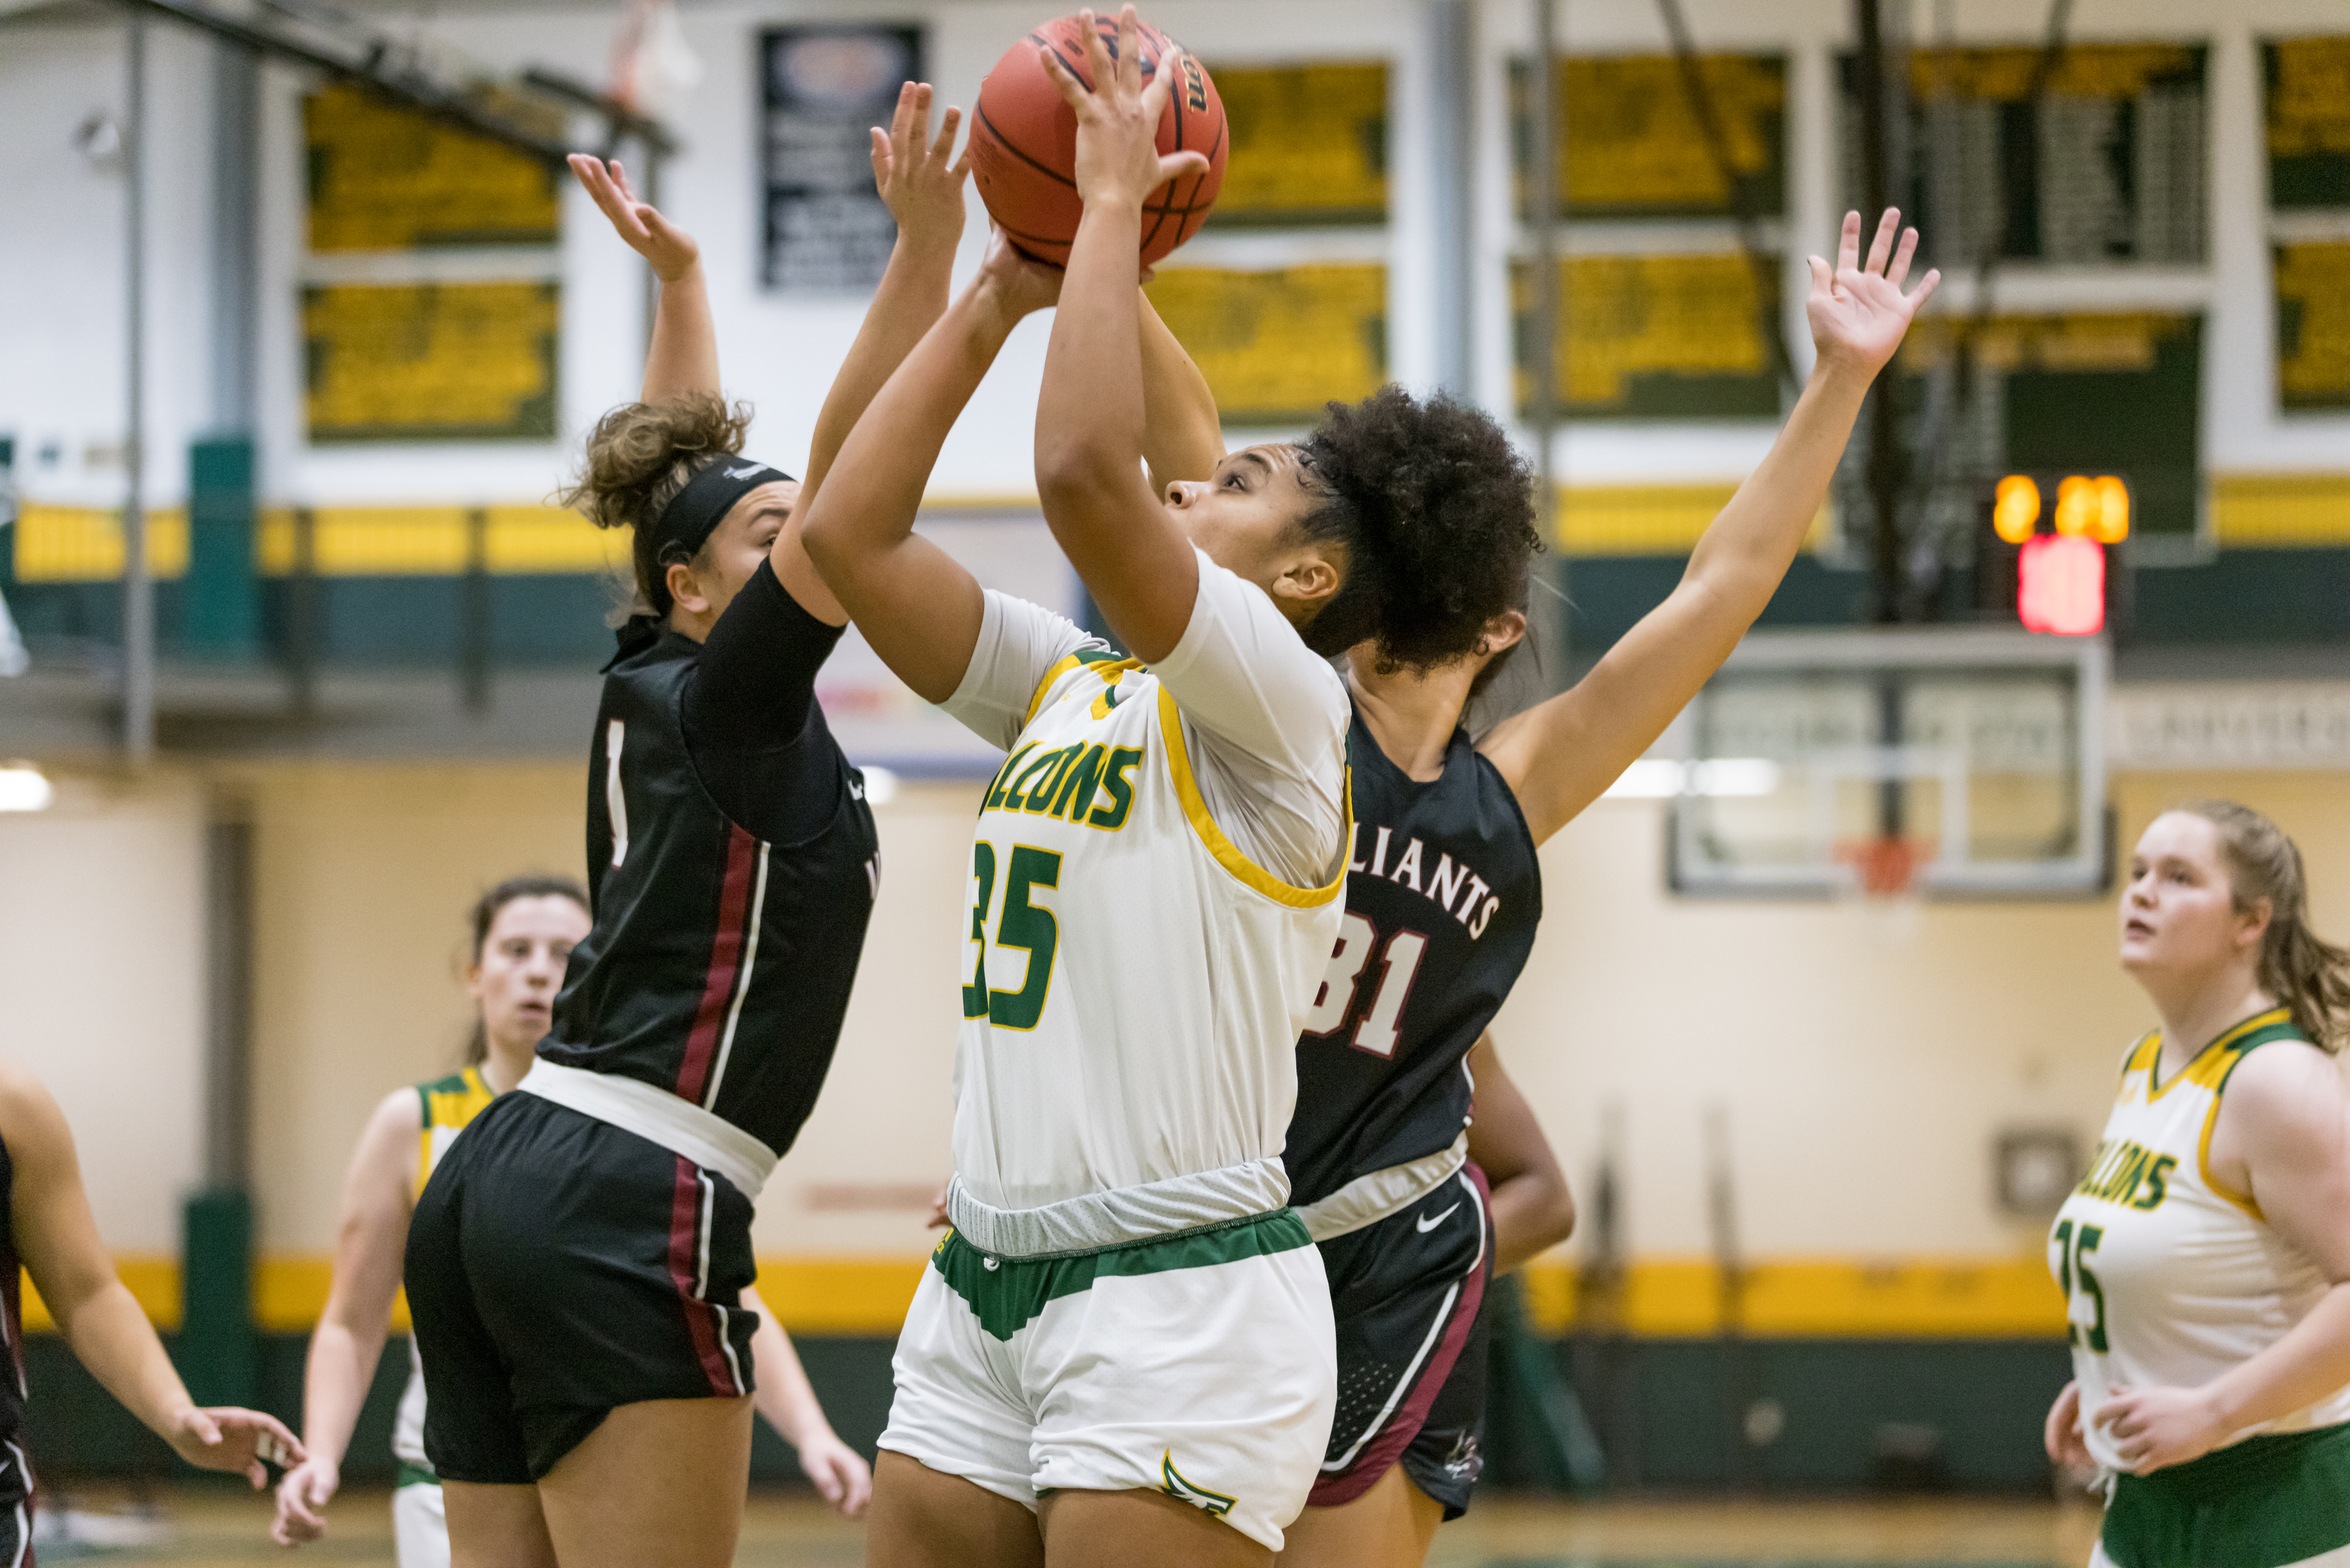 Falcons Fall to Trailblazers in MASCAC Action